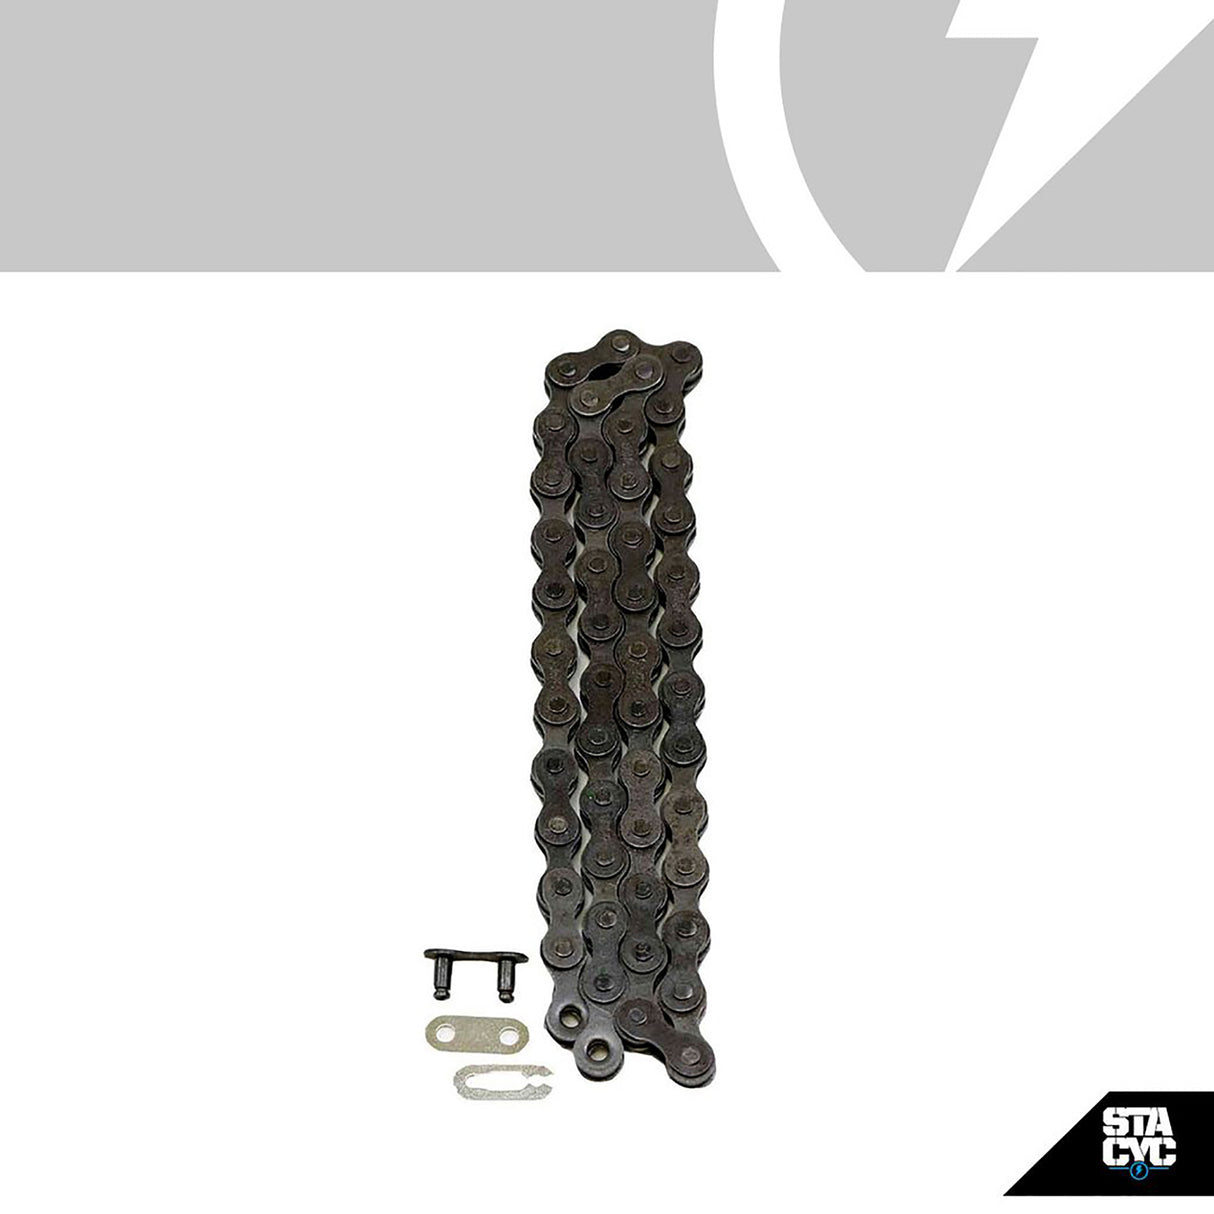 STACYC REPLACEMENT CHAIN - 12 EDRIVE